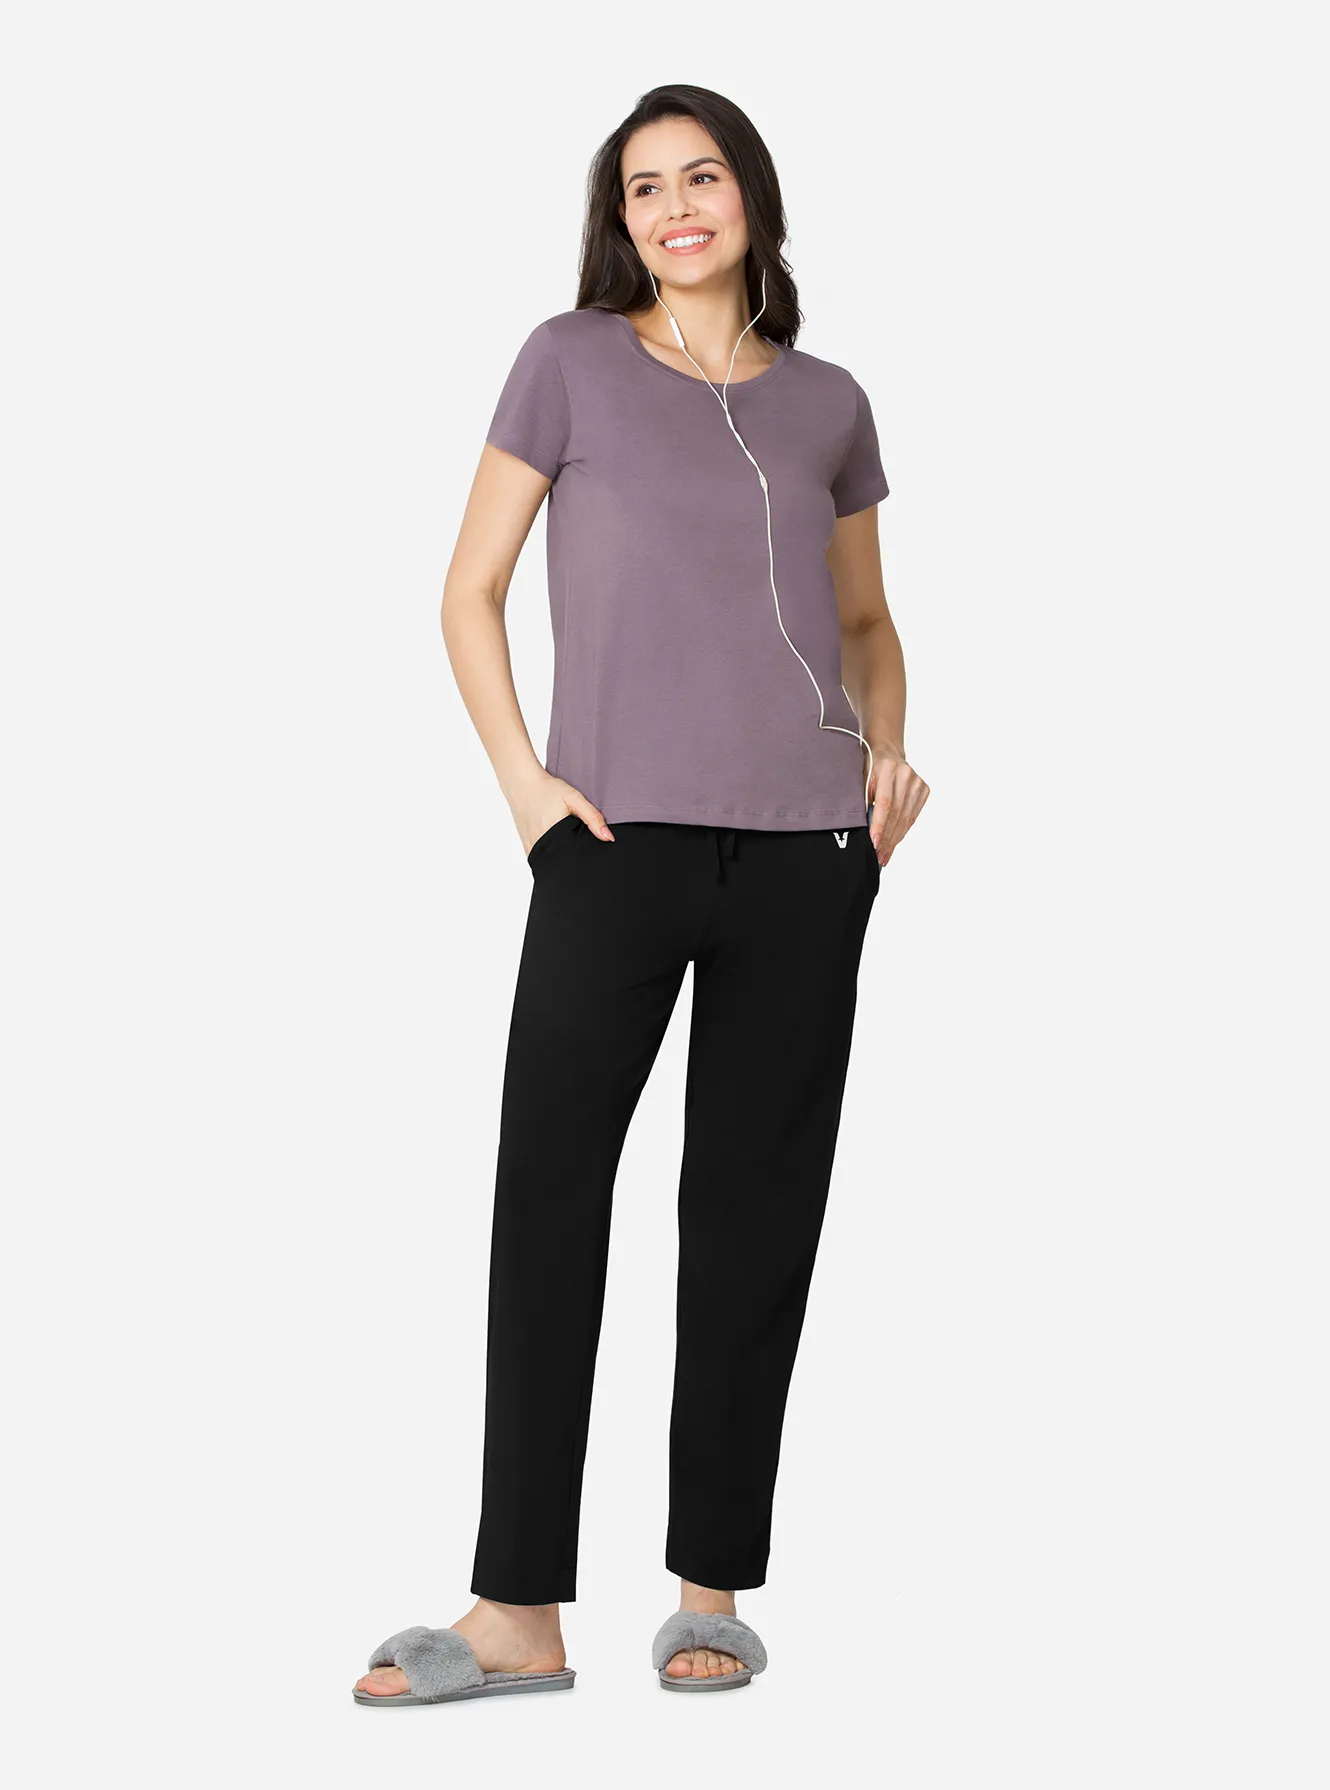 Soft regular-fit cotton stretch lounge pants with concealed drawstring